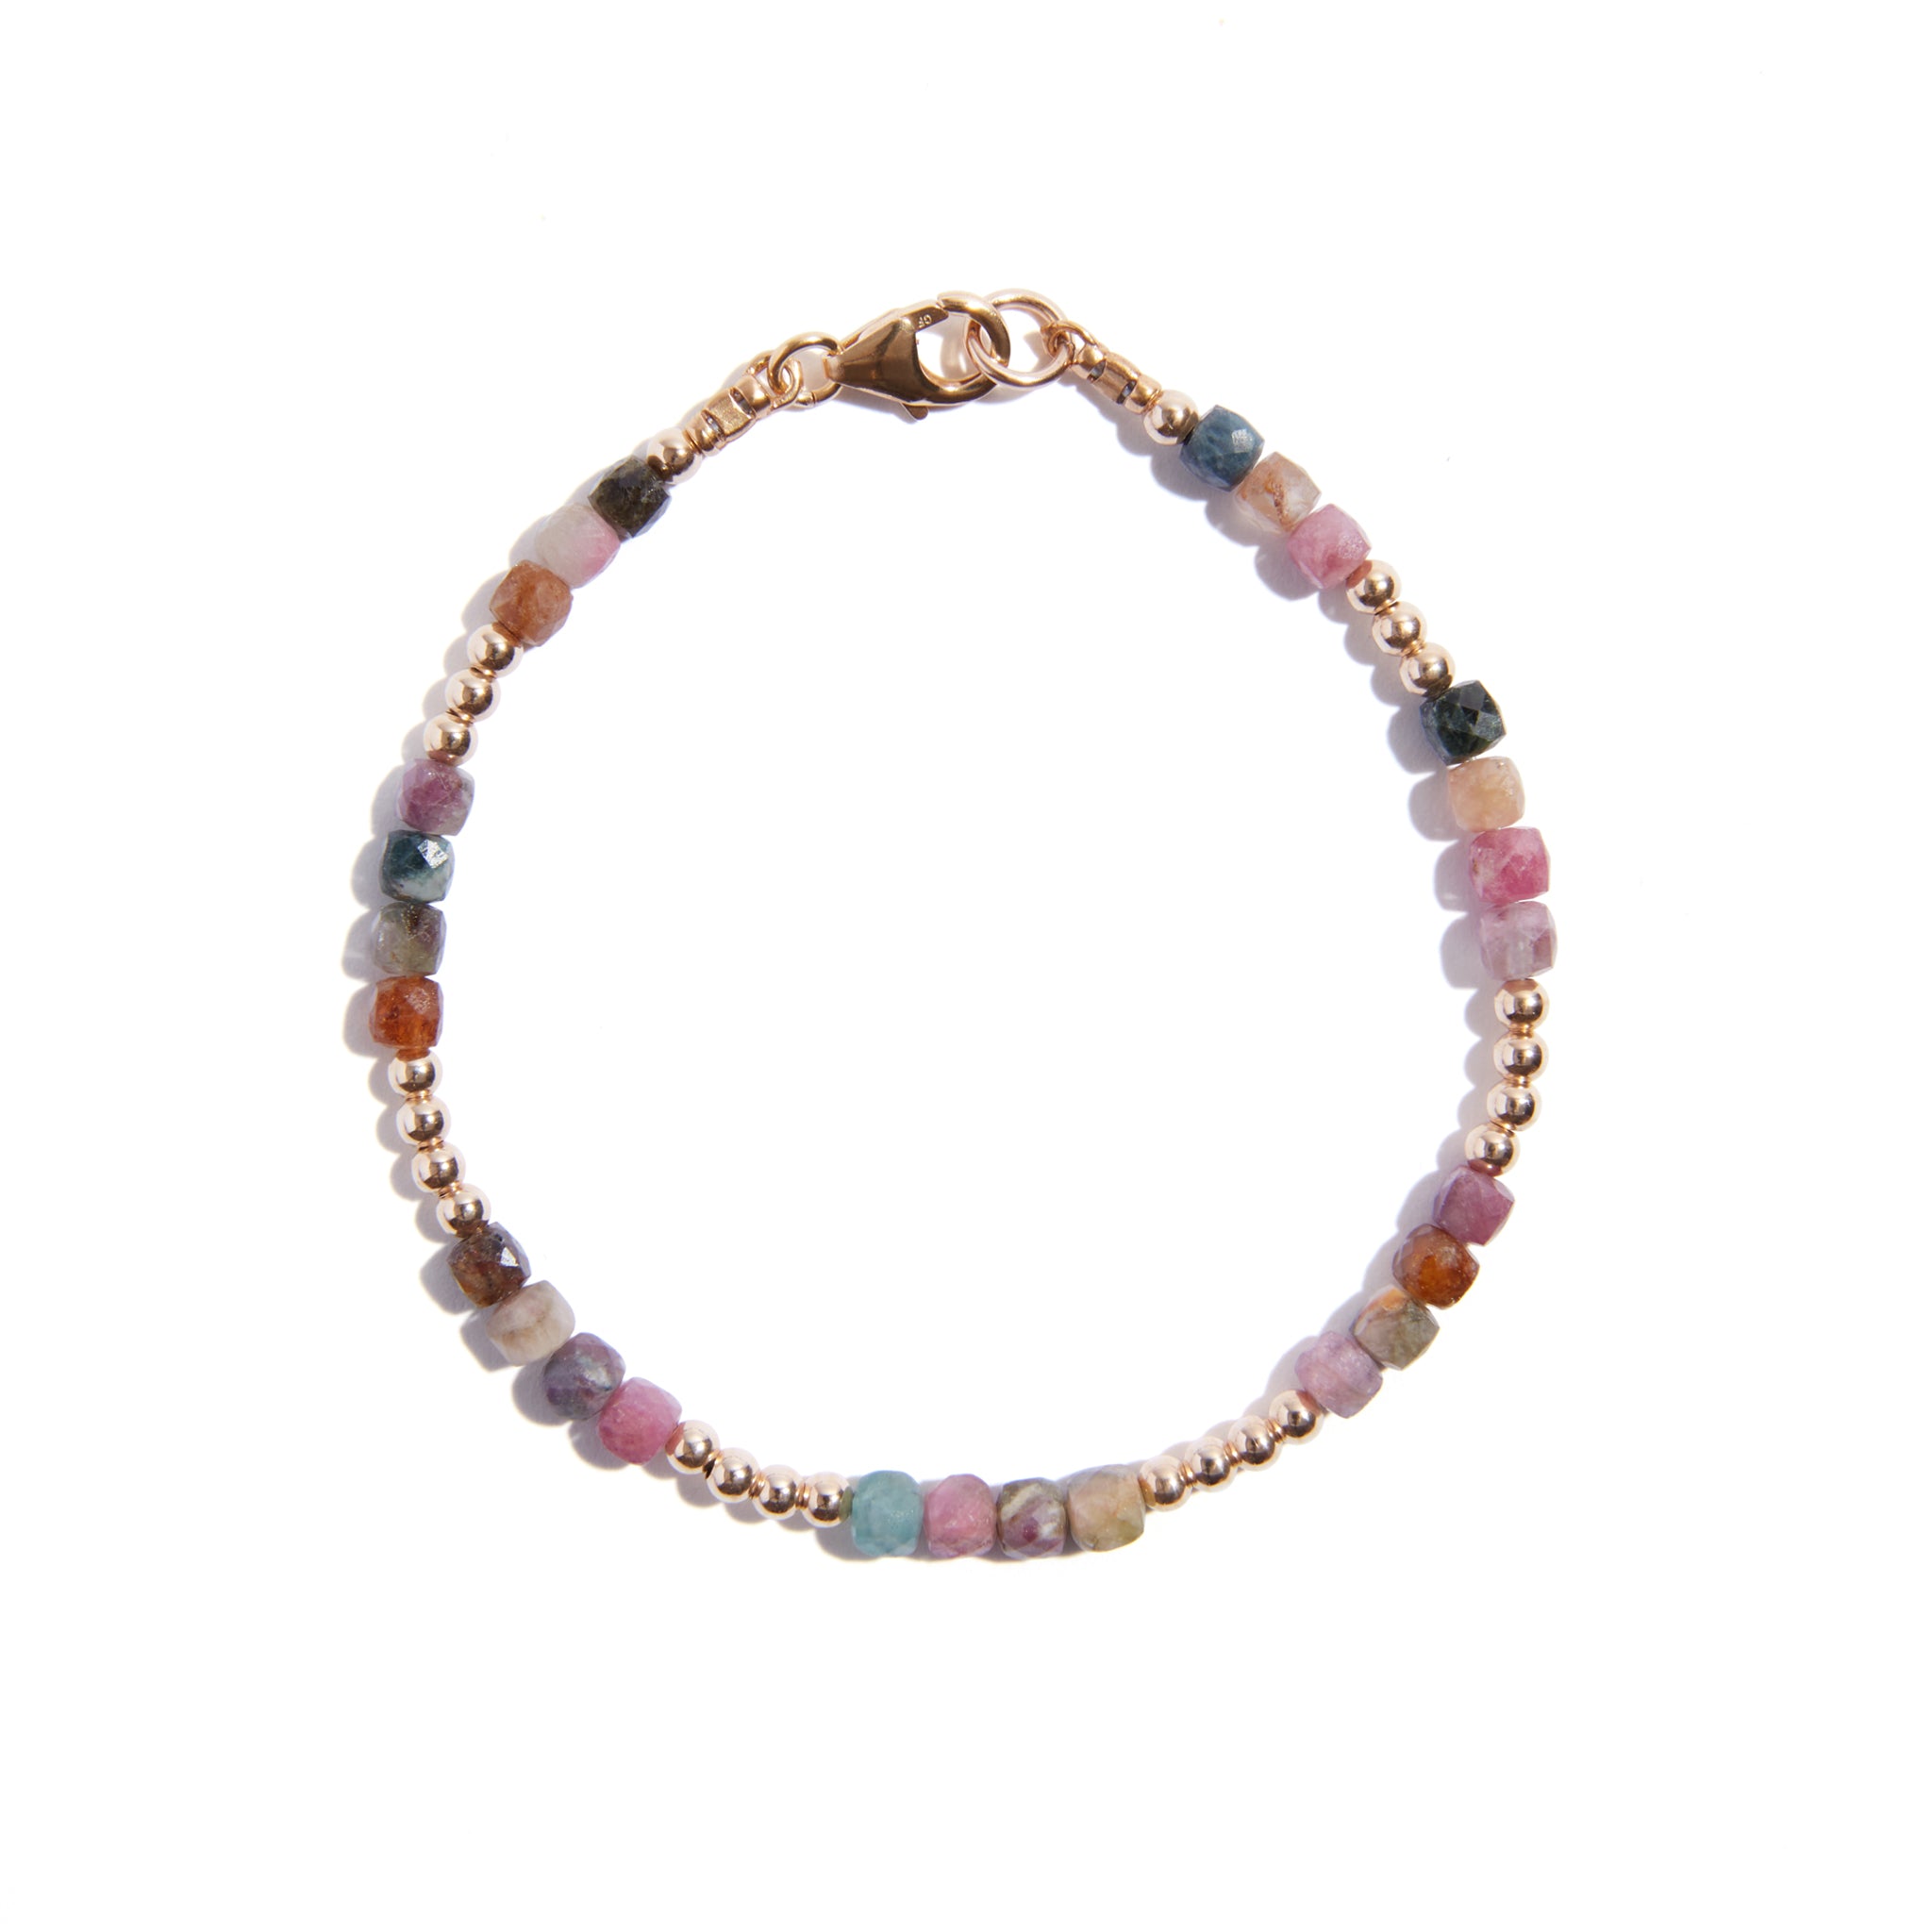 Elevate Your Look with 14ct Gold Filled Multi-Color Gemstone Bracelets - 7.5 Inches of Natural Elegance. Explore the beauty of faceted round beads in a mesmerising mix of colors curated to enhance your style and sophistication. Discover the perfect blend of luxury and versatility in every piece.